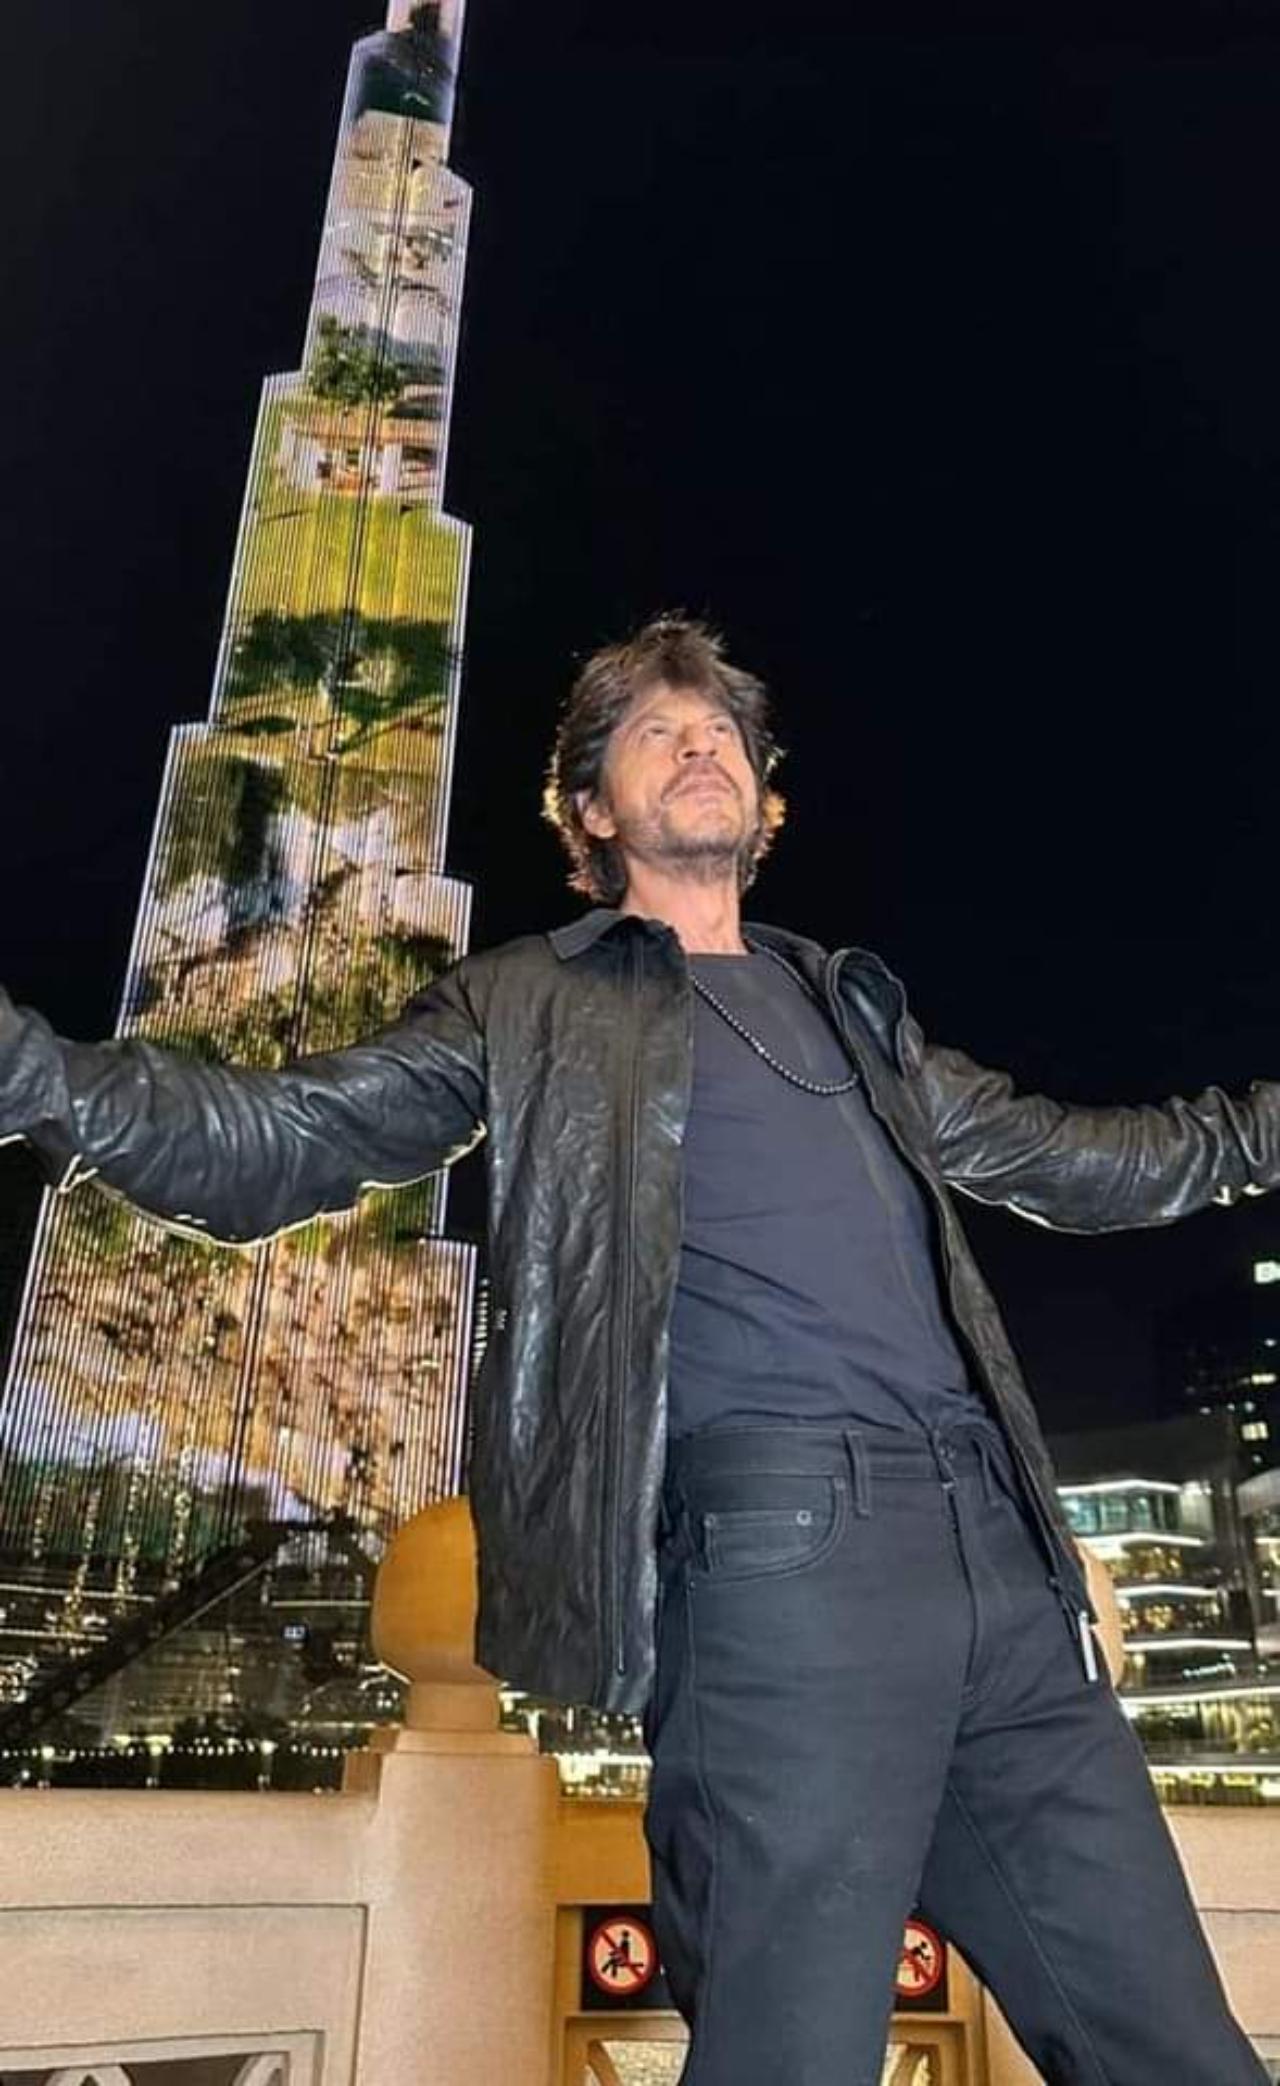 Yash Raj Films, who are producing the film took to Twitter to share glimpses from the trailer showcase on Burj Khalifa. In one of the pictures, SRK was seen doing his signature pose in front of Burj Khalifa